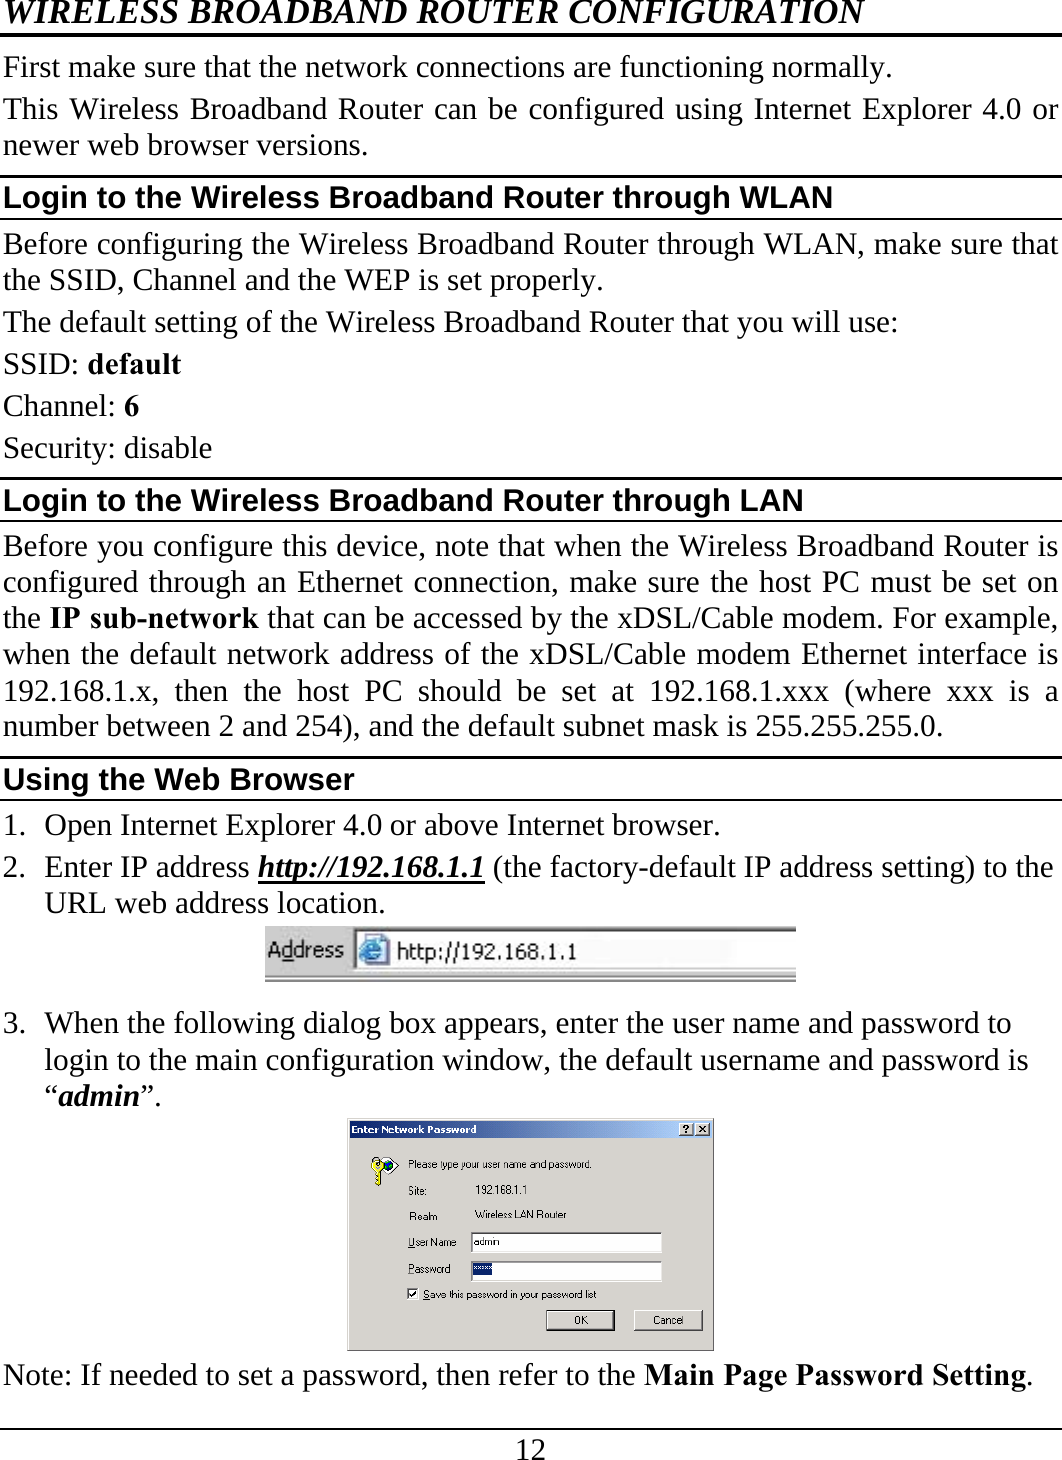 12 WIRELESS BROADBAND ROUTER CONFIGURATION First make sure that the network connections are functioning normally.  This Wireless Broadband Router can be configured using Internet Explorer 4.0 or newer web browser versions. Login to the Wireless Broadband Router through WLAN Before configuring the Wireless Broadband Router through WLAN, make sure that the SSID, Channel and the WEP is set properly. The default setting of the Wireless Broadband Router that you will use: SSID: default Channel: 6 Security: disable Login to the Wireless Broadband Router through LAN Before you configure this device, note that when the Wireless Broadband Router is configured through an Ethernet connection, make sure the host PC must be set on the IP sub-network that can be accessed by the xDSL/Cable modem. For example, when the default network address of the xDSL/Cable modem Ethernet interface is 192.168.1.x, then the host PC should be set at 192.168.1.xxx (where xxx is a number between 2 and 254), and the default subnet mask is 255.255.255.0. Using the Web Browser 1. Open Internet Explorer 4.0 or above Internet browser. 2. Enter IP address http://192.168.1.1 (the factory-default IP address setting) to the URL web address location.  3. When the following dialog box appears, enter the user name and password to login to the main configuration window, the default username and password is “admin”.  Note: If needed to set a password, then refer to the Main Page Password Setting. 